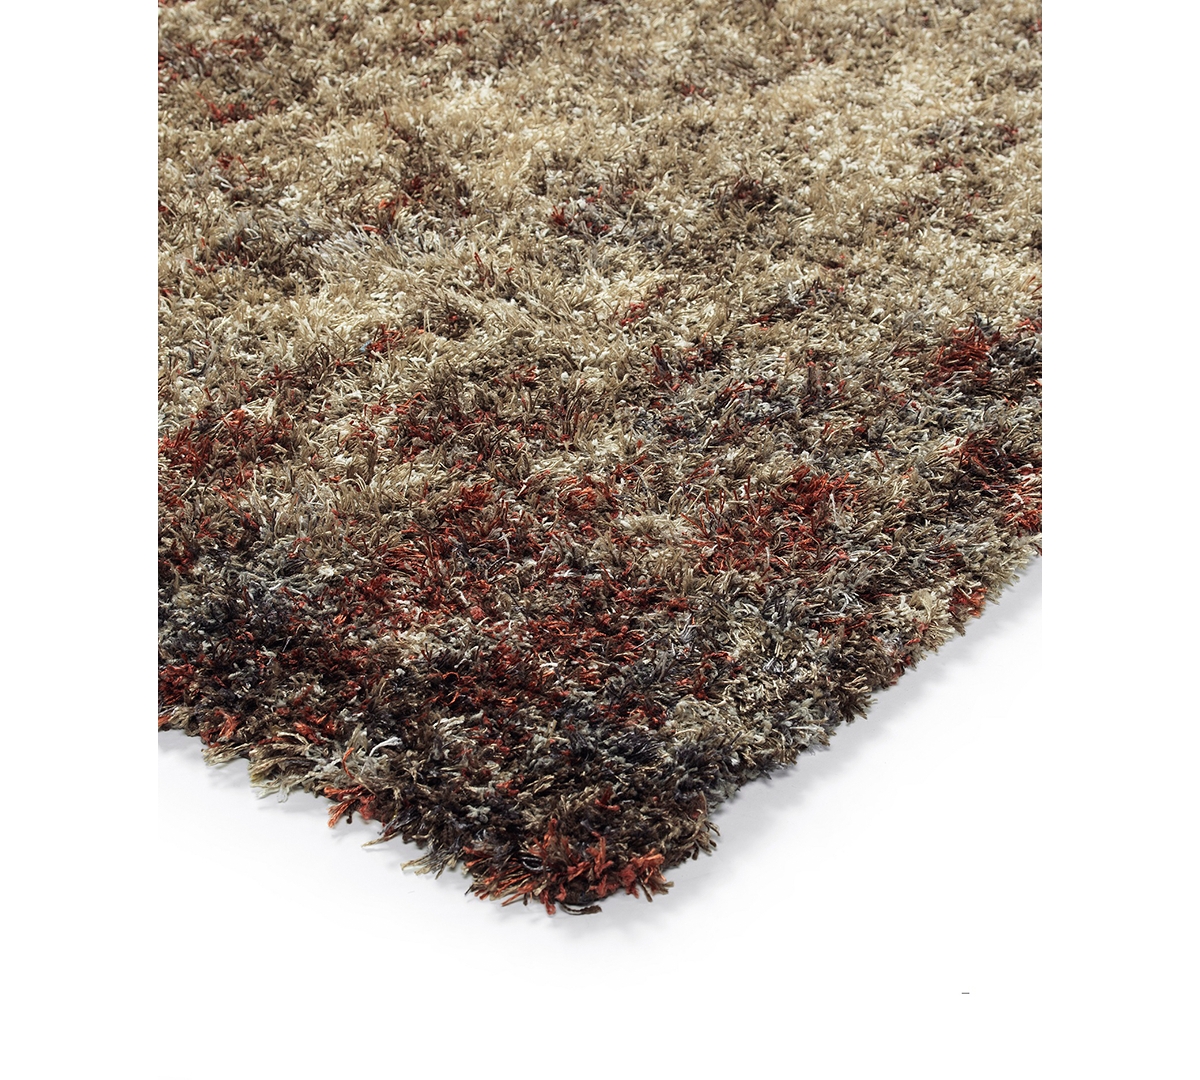 Shop D Style Jackson Shag Drizzle 3'3" X 5'1" Area Rug In Tan,beige